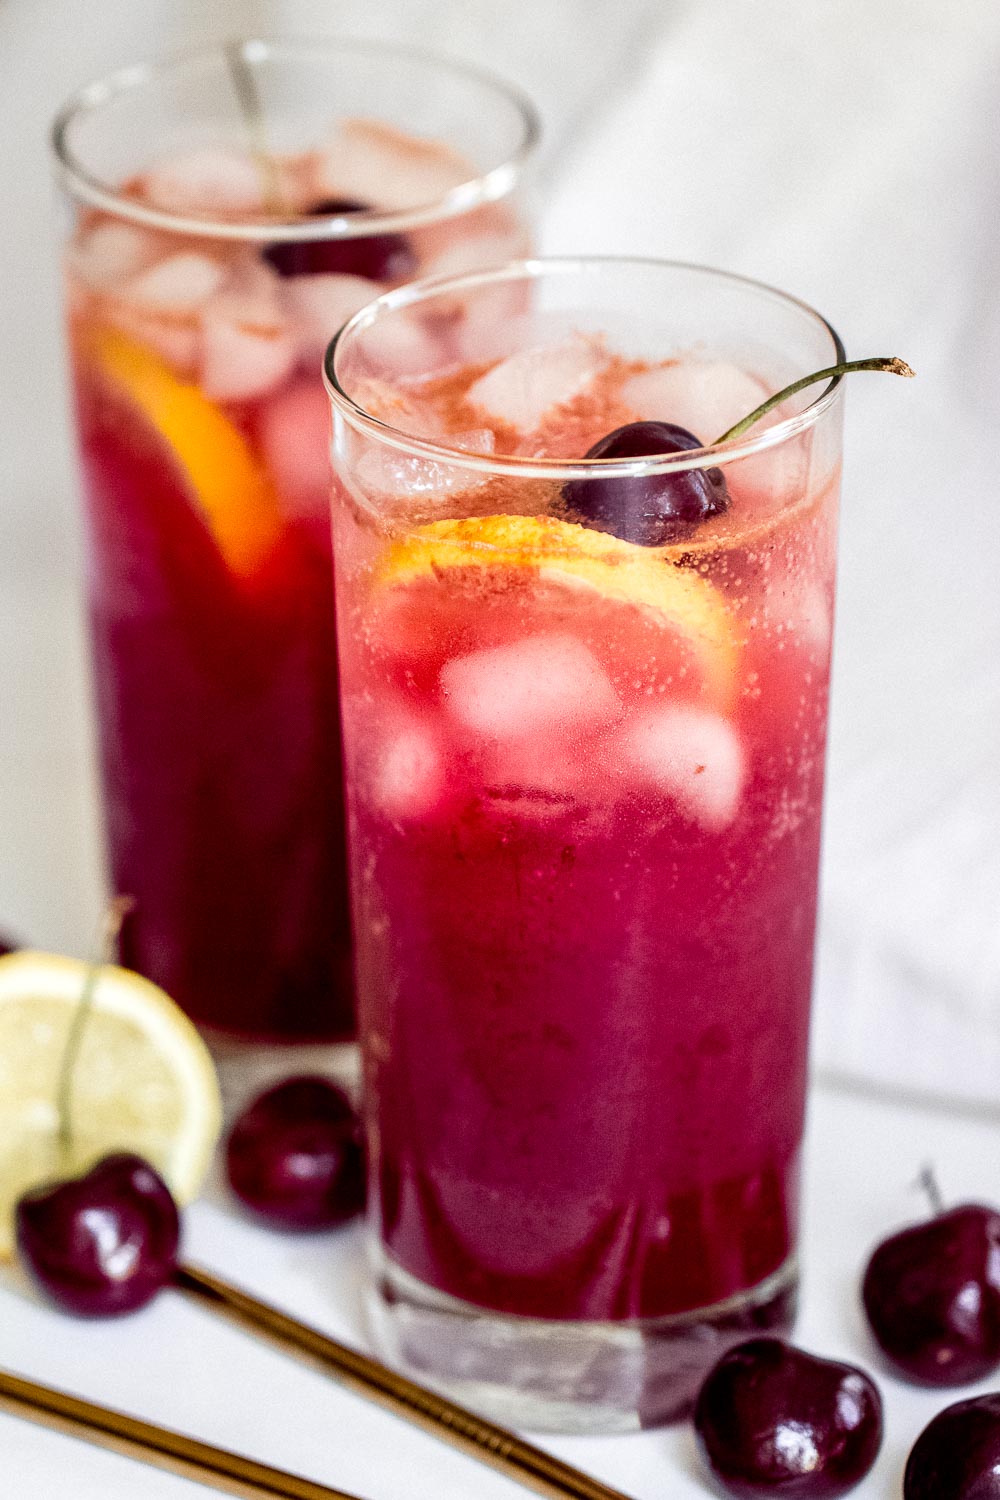 There’s nothing like a big glass of thirst-quenching Sparkling Cherry Lemonade on a hot summer’s day. Easy to make and so refreshing. Best of all, it's a non-alcoholic drink. So it's perfect for kids too!